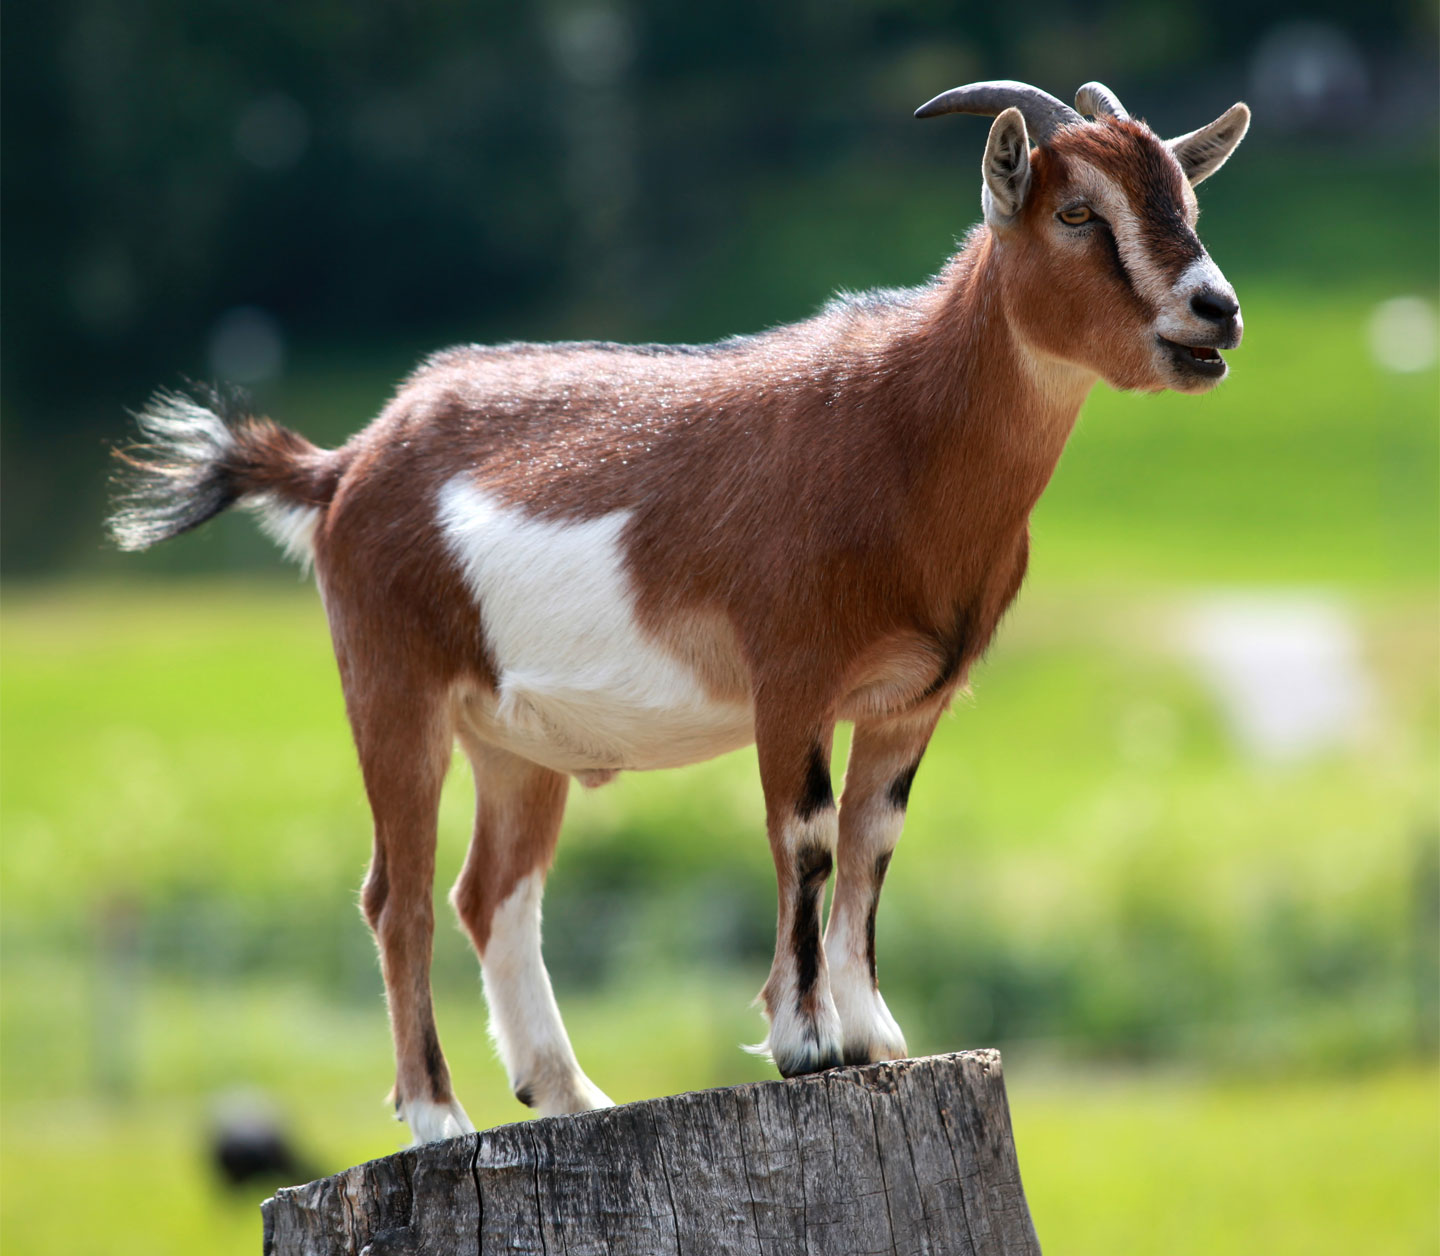 Adult goat perched on a tree stump